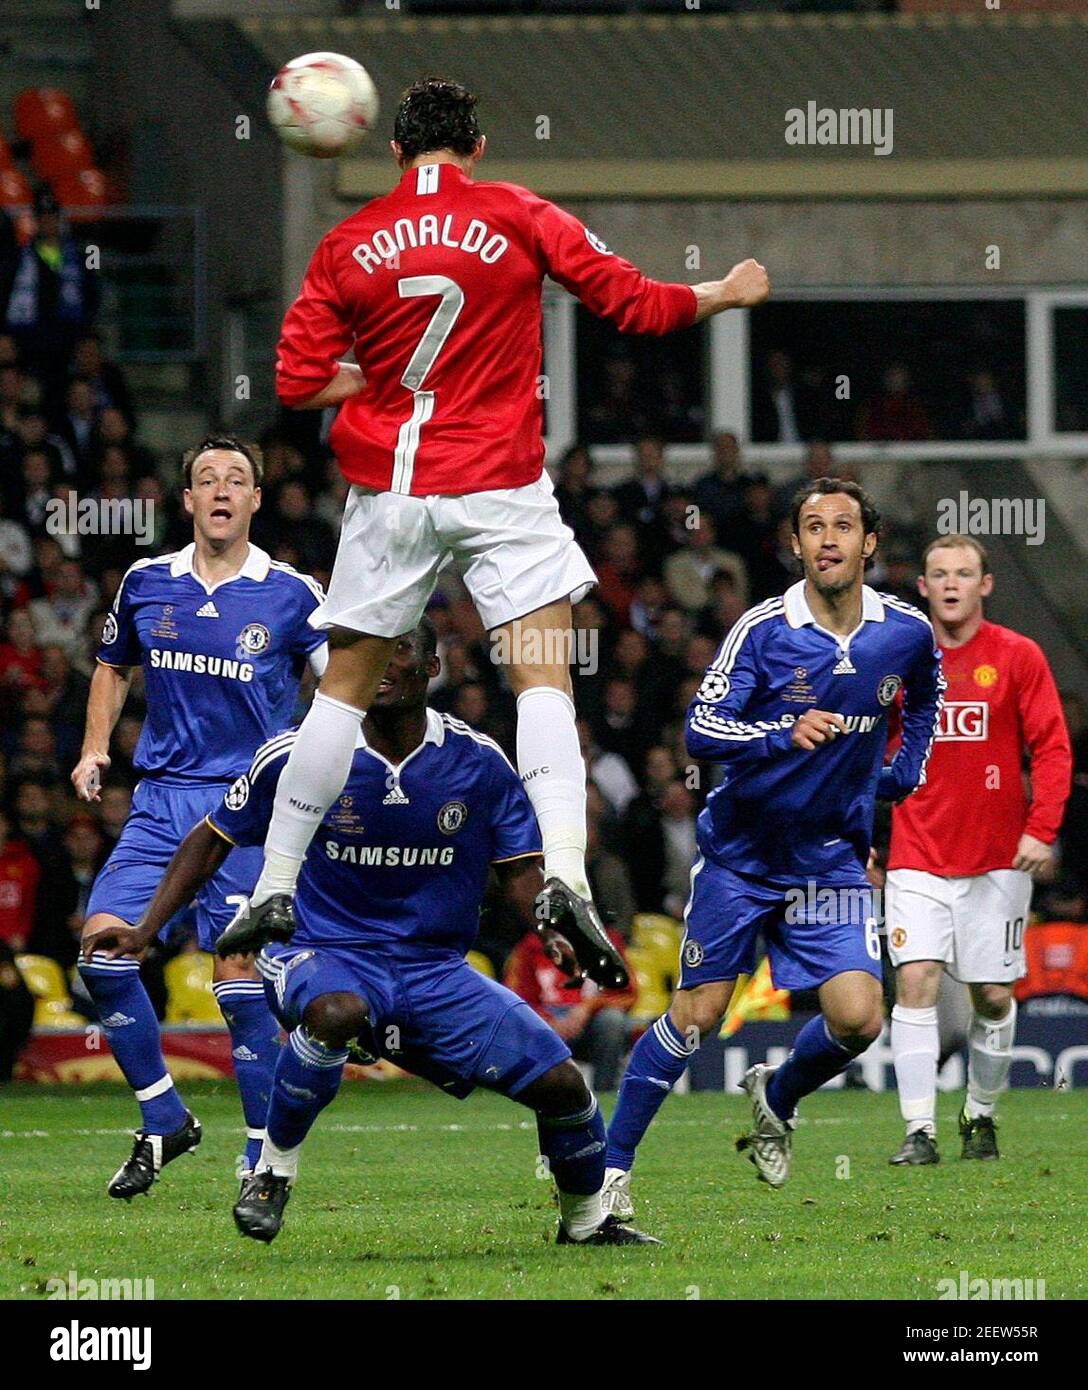 Football - Chelsea v Manchester United 2008 Champions League Final -  Luzhniki Stadium, Moscow, Russia - 21/5/08 Cristiano Ronaldo scores the  first goal for Manchester United Mandatory Credit: Action Images / Scott  Heavey Livepic Stock Photo - Alamy